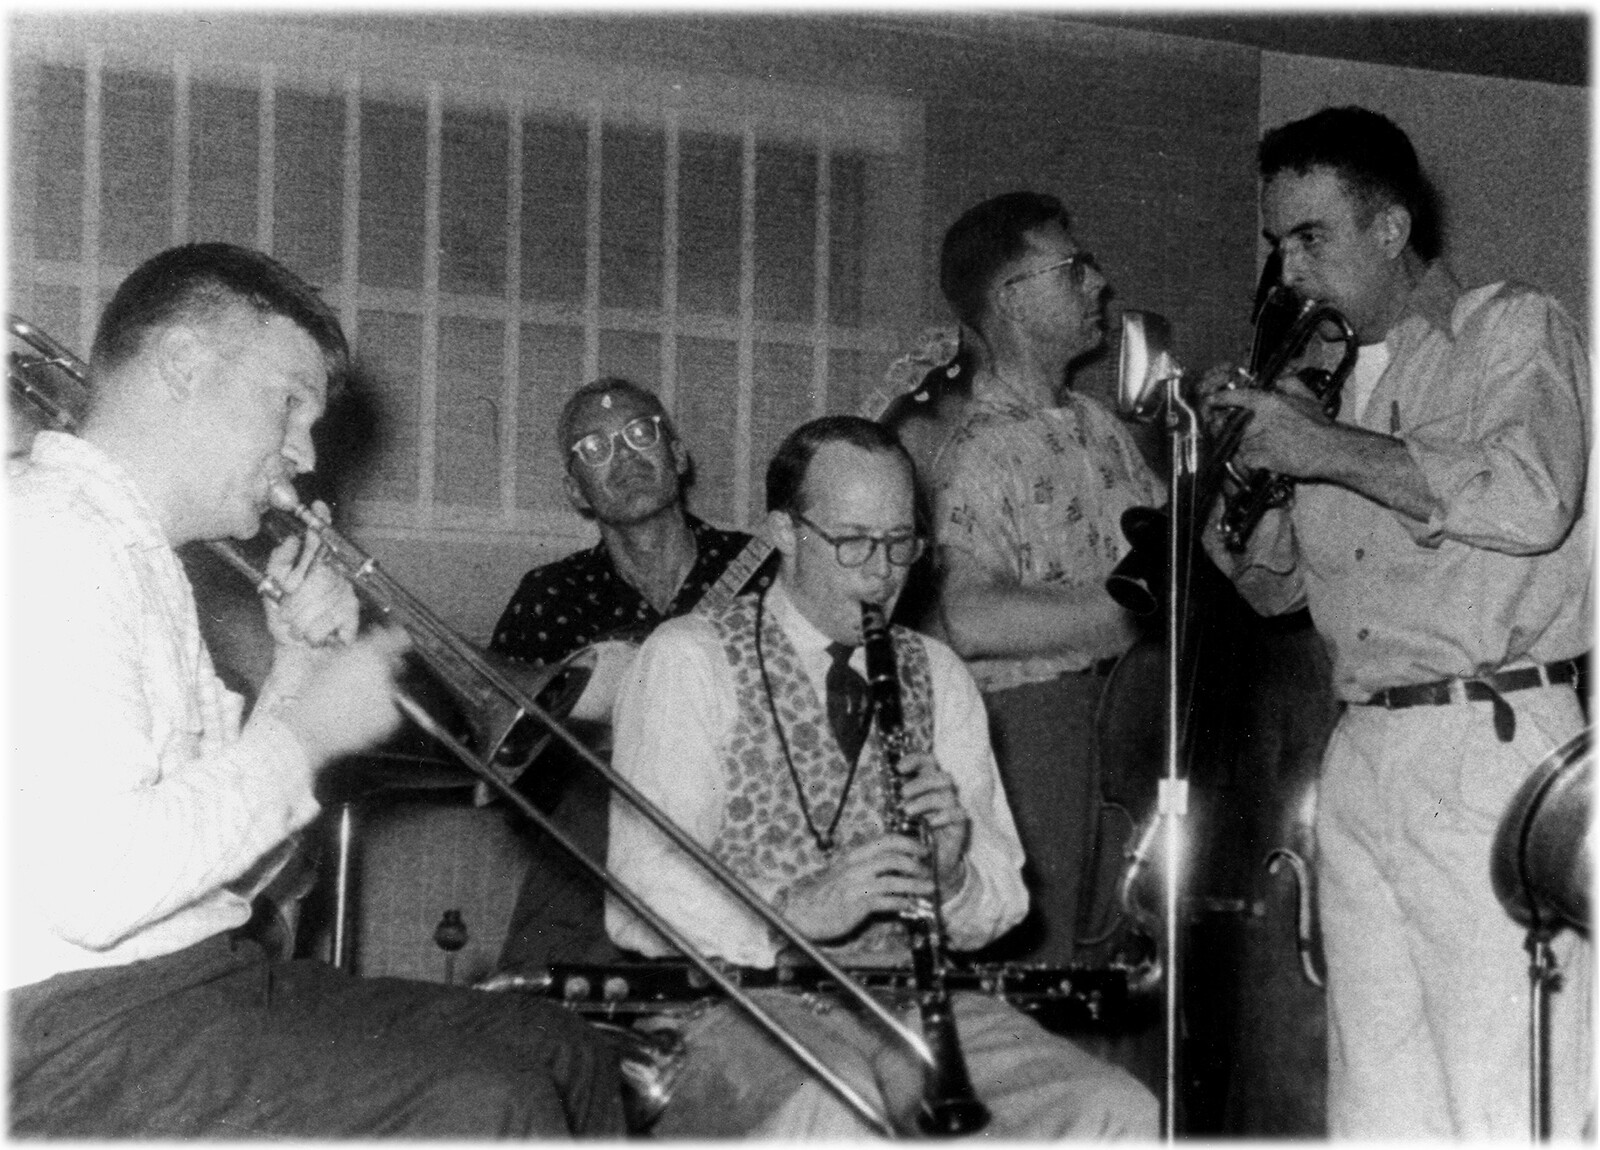 The Bearcats, L to R: Bob Mielke, Dick Oxtot, first alternate clarinetist Bill Napier, Pete Allen and P.T. Stanton at the Lark’s Club c. 1955.